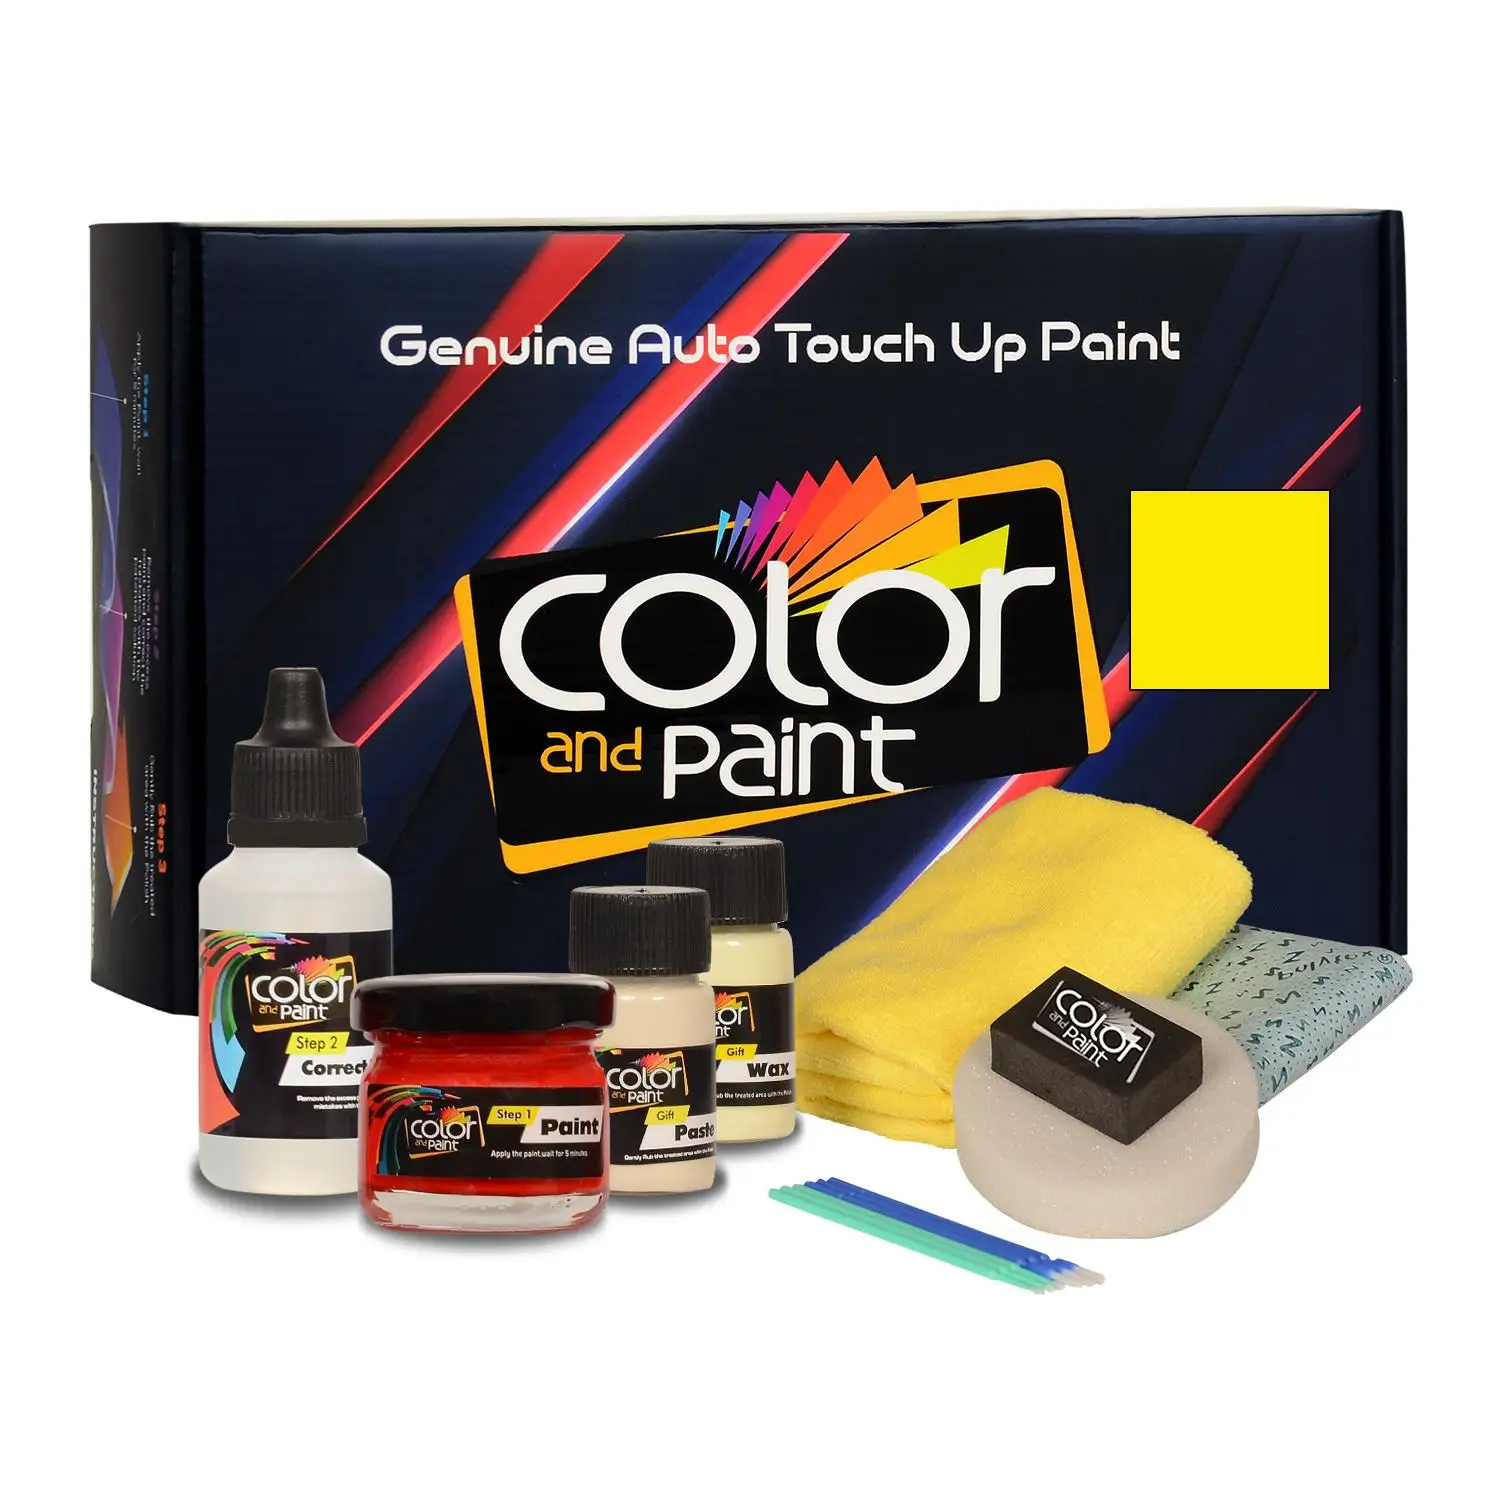 

Color and Paint compatible with Volkswagen Automotive Touch Up Paint - ELFENBEIN - L62 - Basic Care